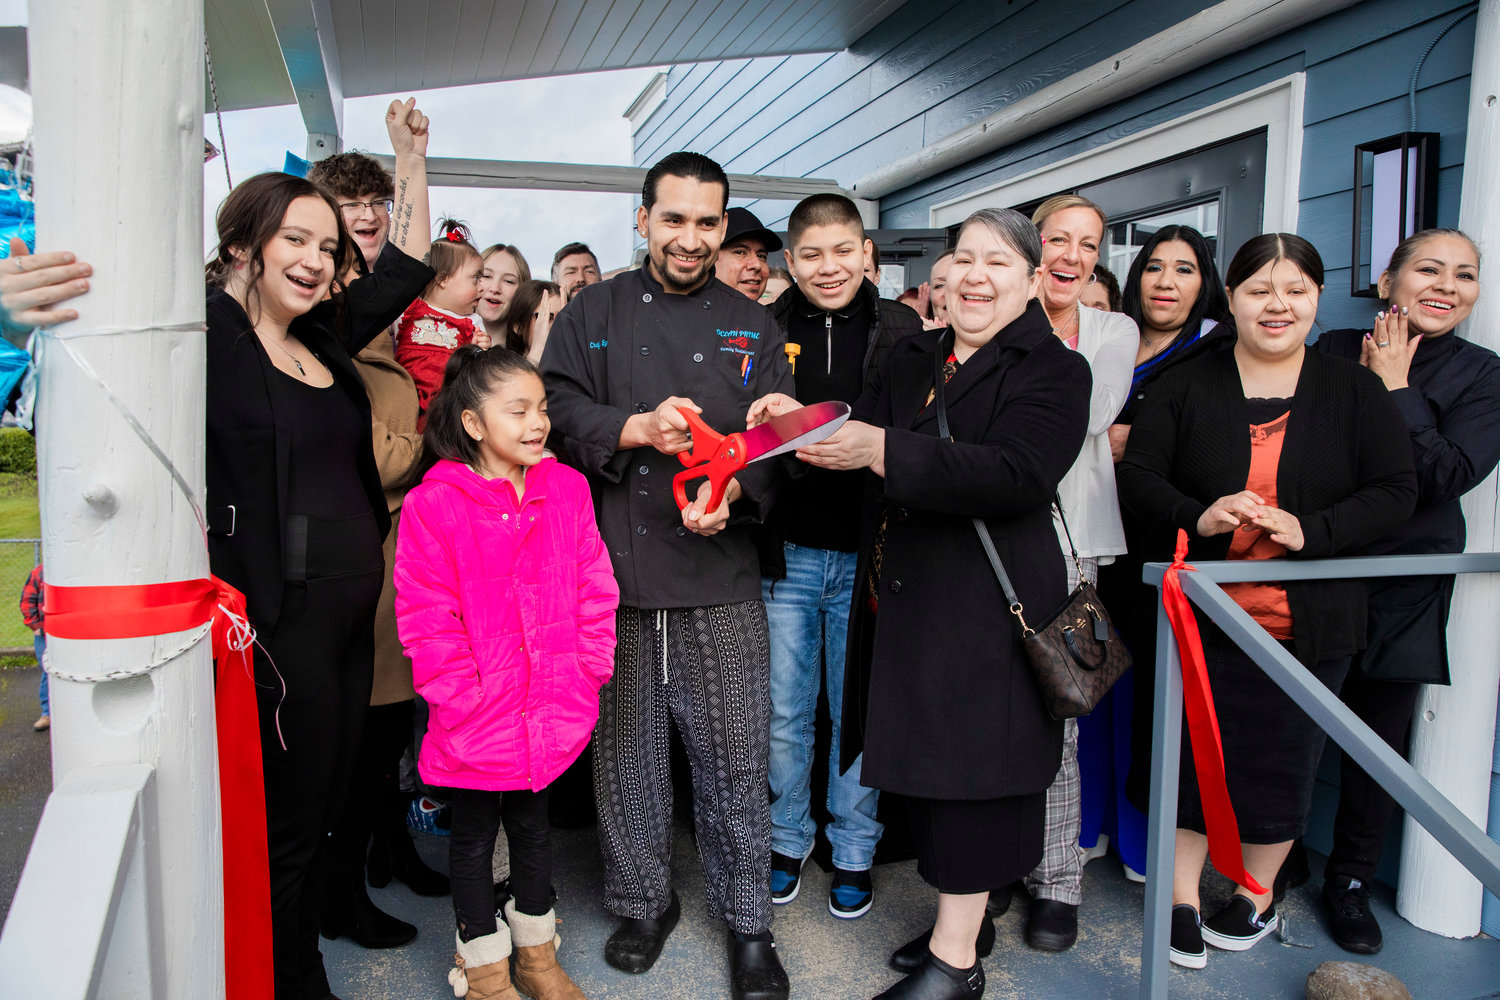 Hailie Haubrick raises her hand and cheers as Chef Eyner "Rene" Cardona cuts a ribbon during a grand opening ceremony alongside his wife Odilia Gaspar and General Manager Kristi Beebe Monday morning in Chehalis. Located at the former Kit Carson Family Restaurant building at 107 SW Interstate Ave., Ocean Prime’s menu will feature a variety of items, such as ribeye, tomahawk steaks, king salmon, ribs, soups, sandwiches, pasta and salads. For more information and to view Ocean Prime Family Restaurant’s full menu, visit its Facebook page.